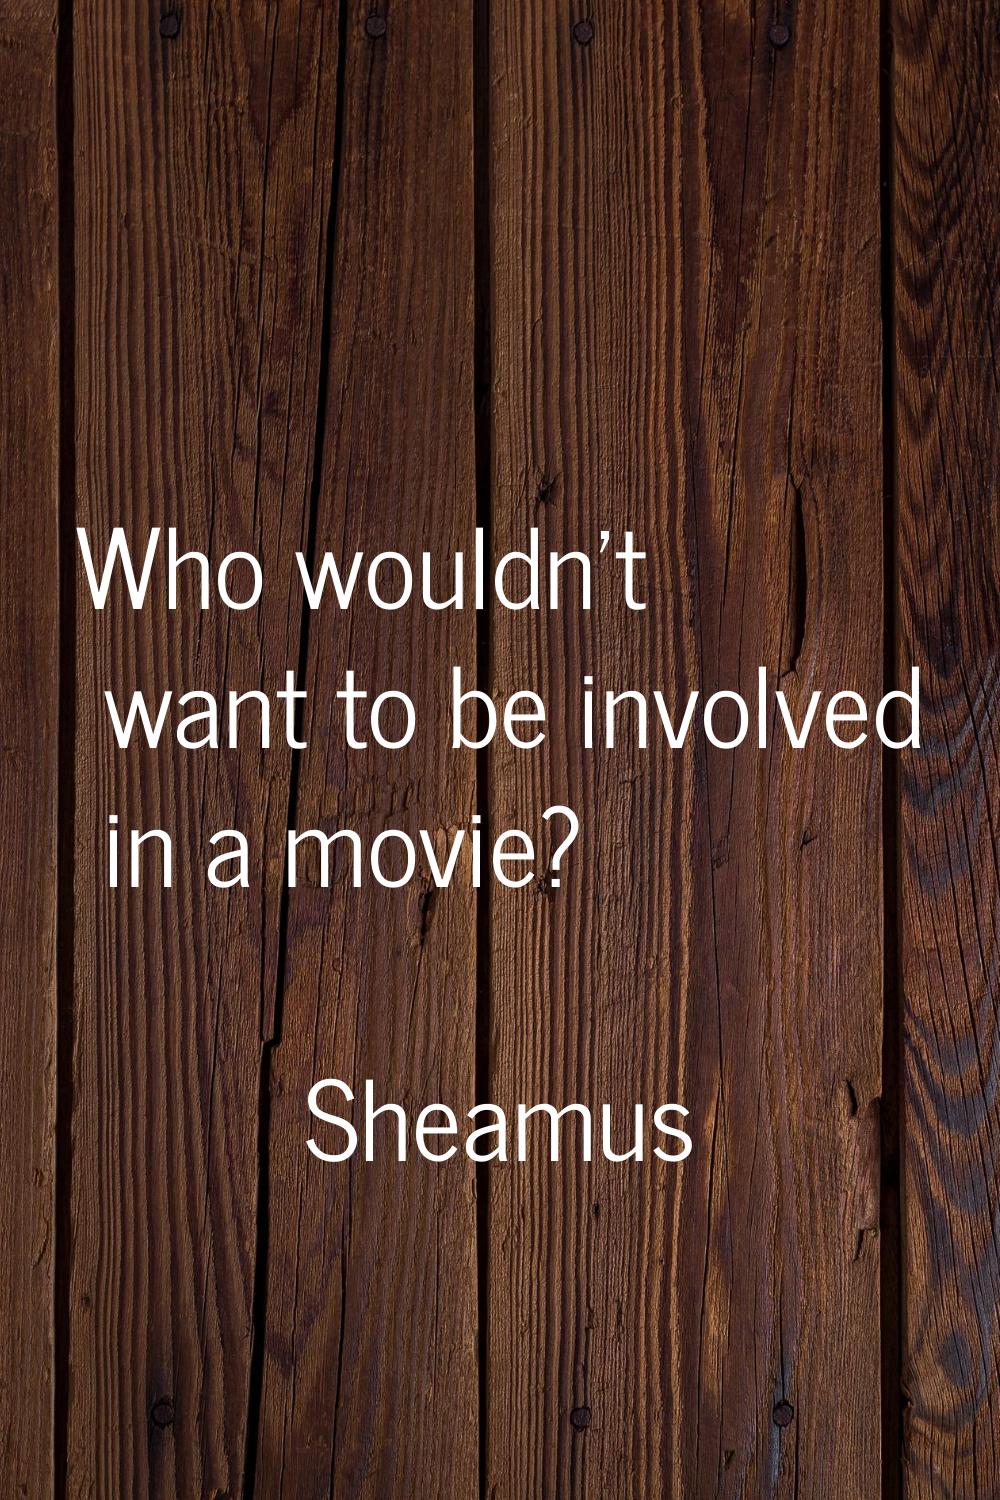 Who wouldn't want to be involved in a movie?